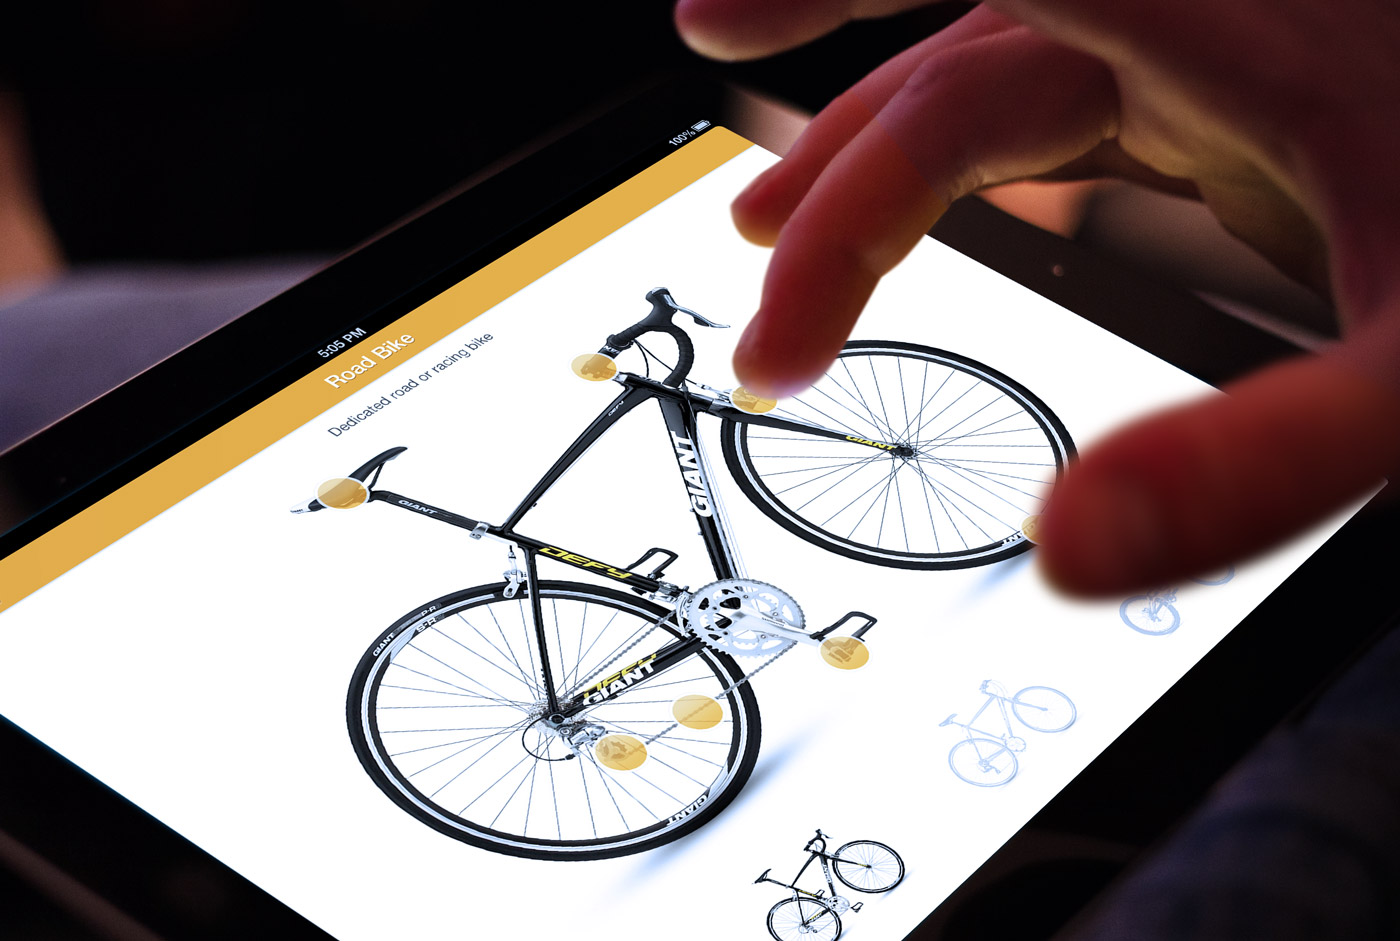 View of Bike Doctor being used on iPad